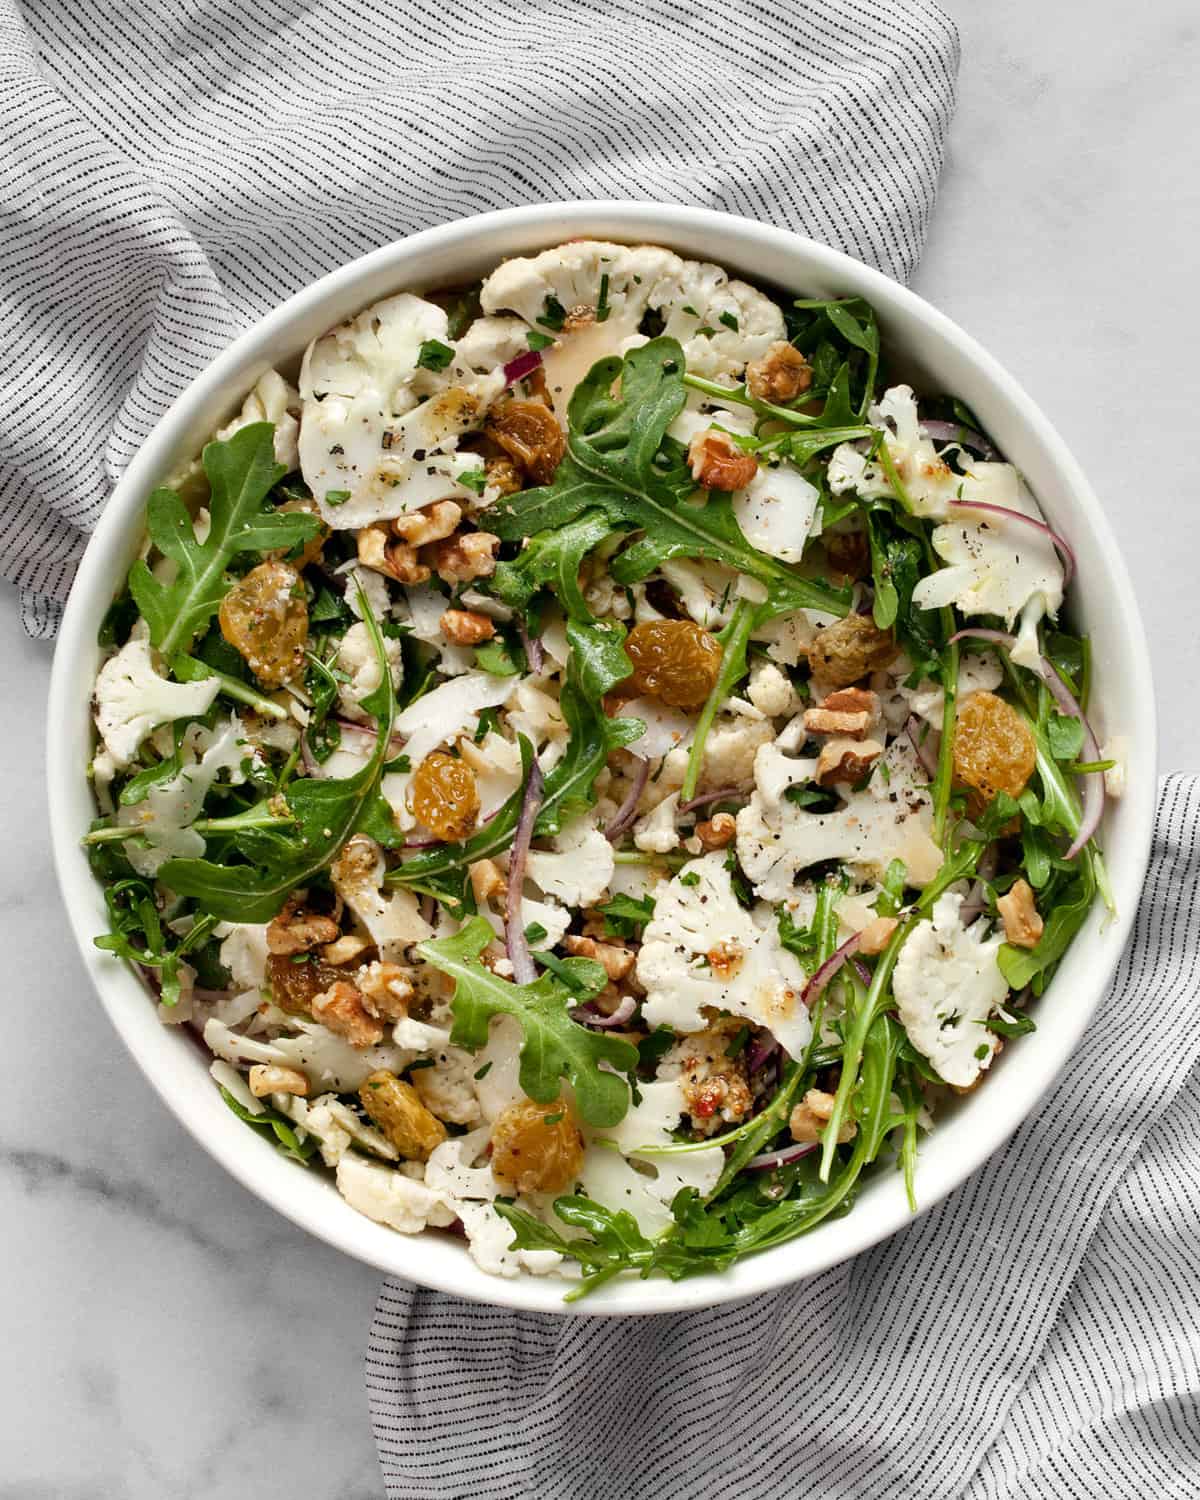 Salad with sliced cauliflower and arugula in a bowl.